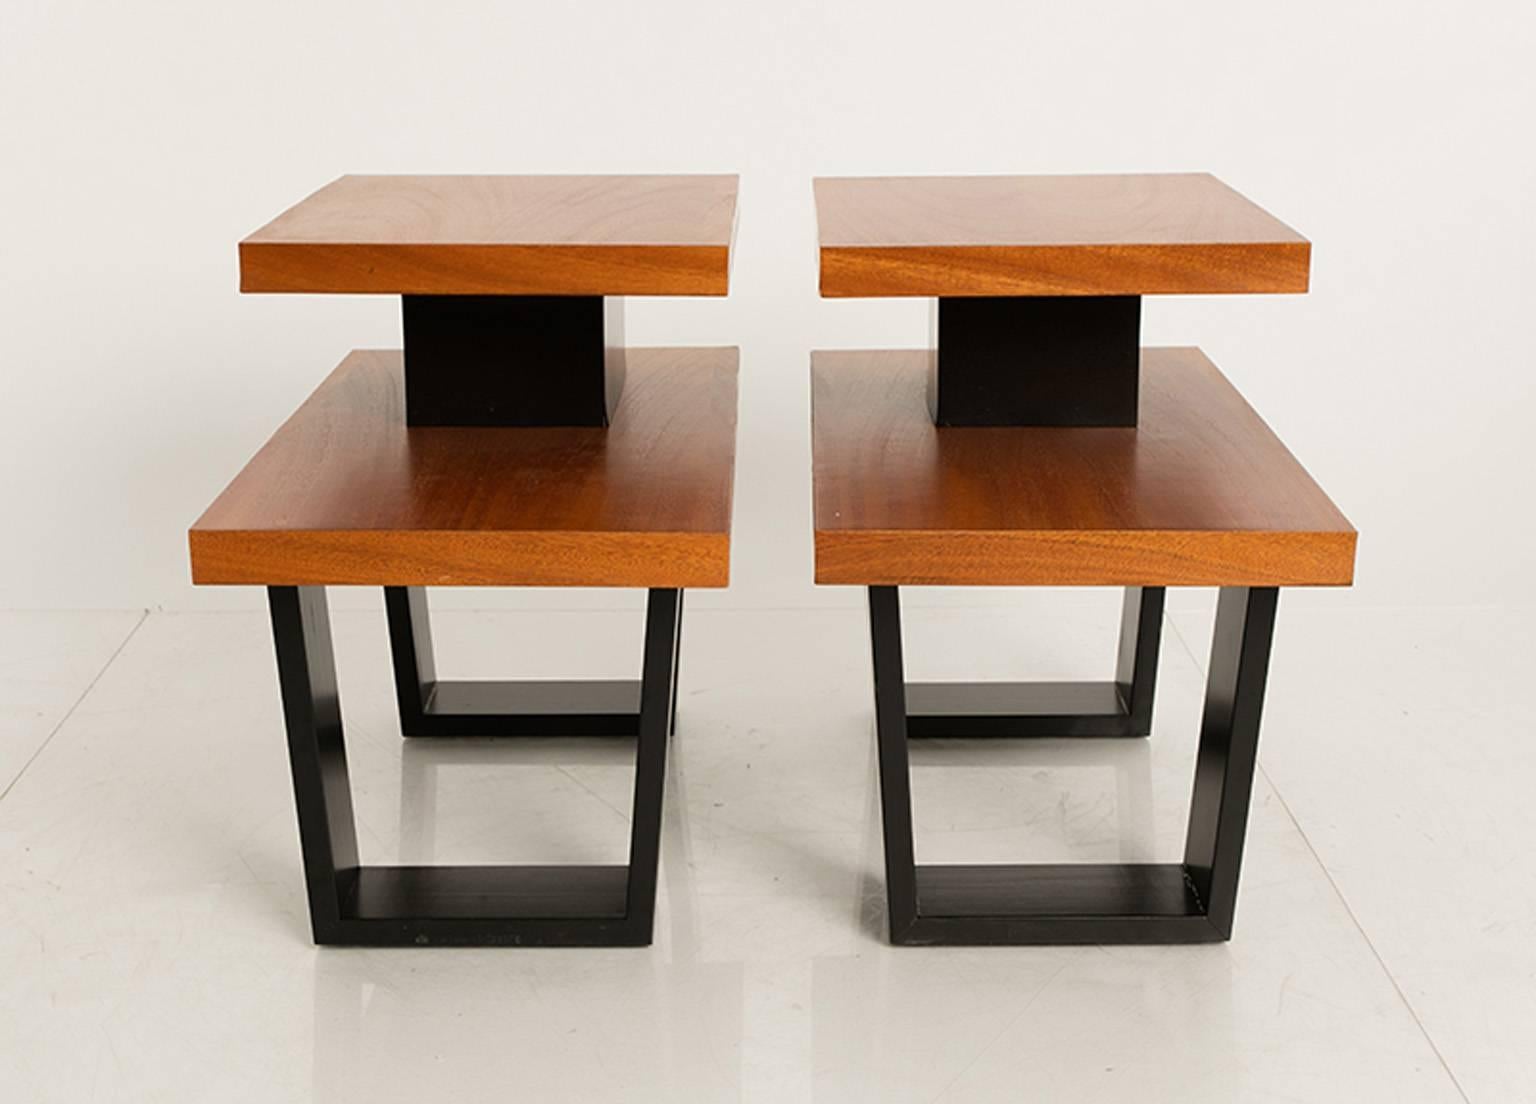 Pair of ebony and mahogany step side tables by Paul Frankl.